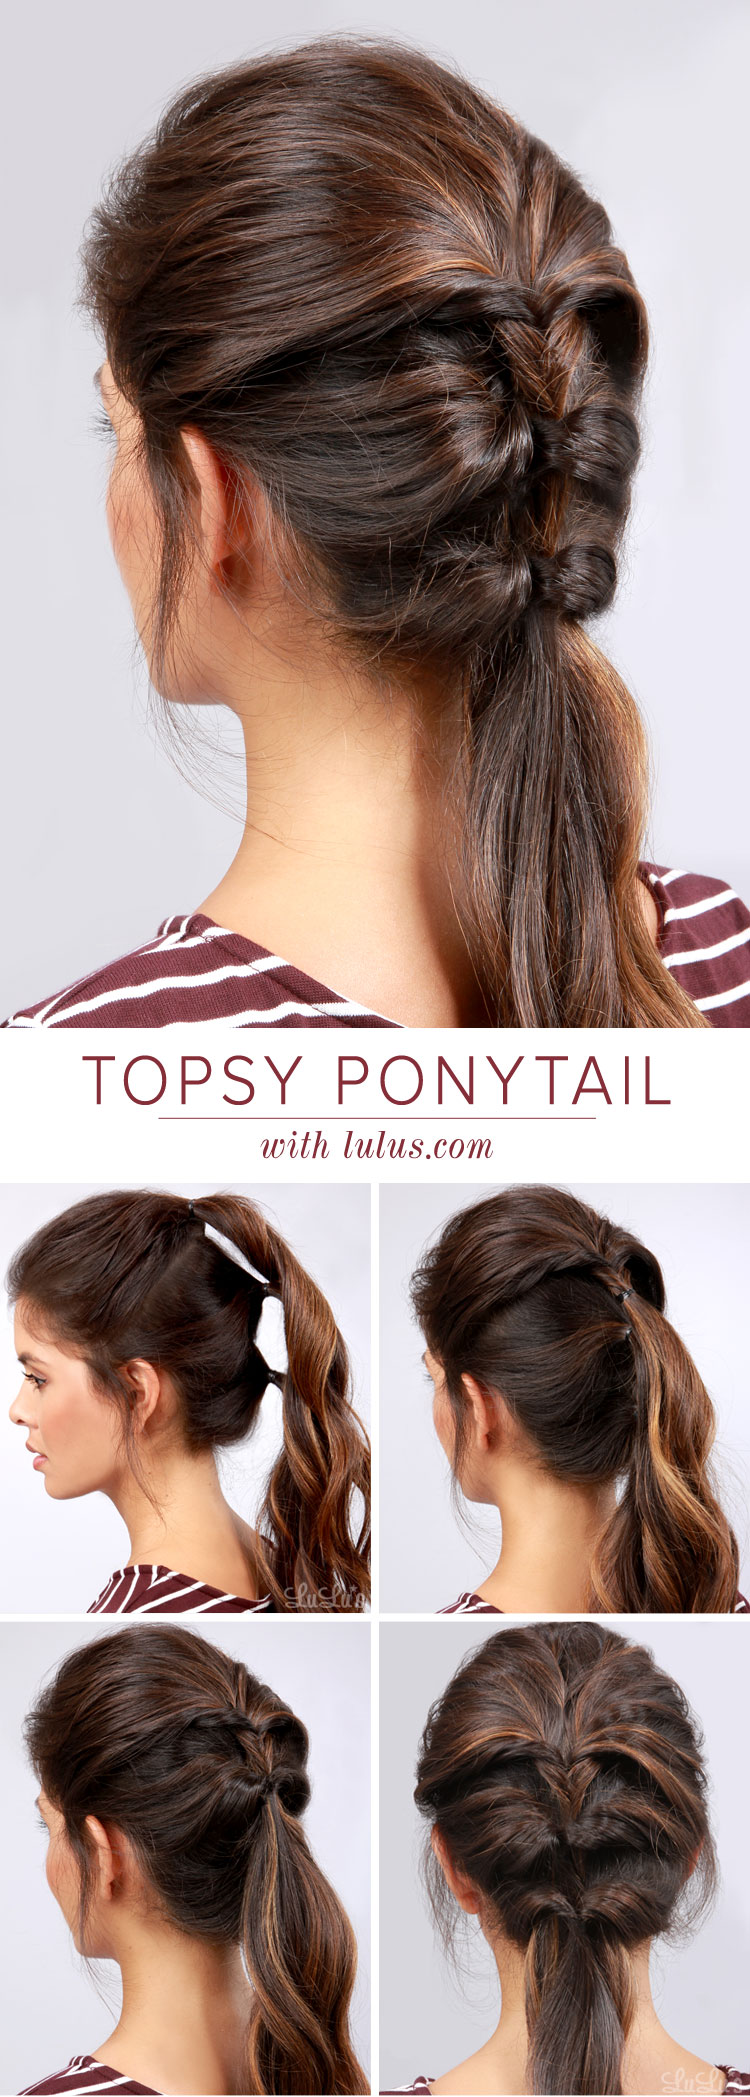 15 stylish step-by-step hairstyle tutorials you must see